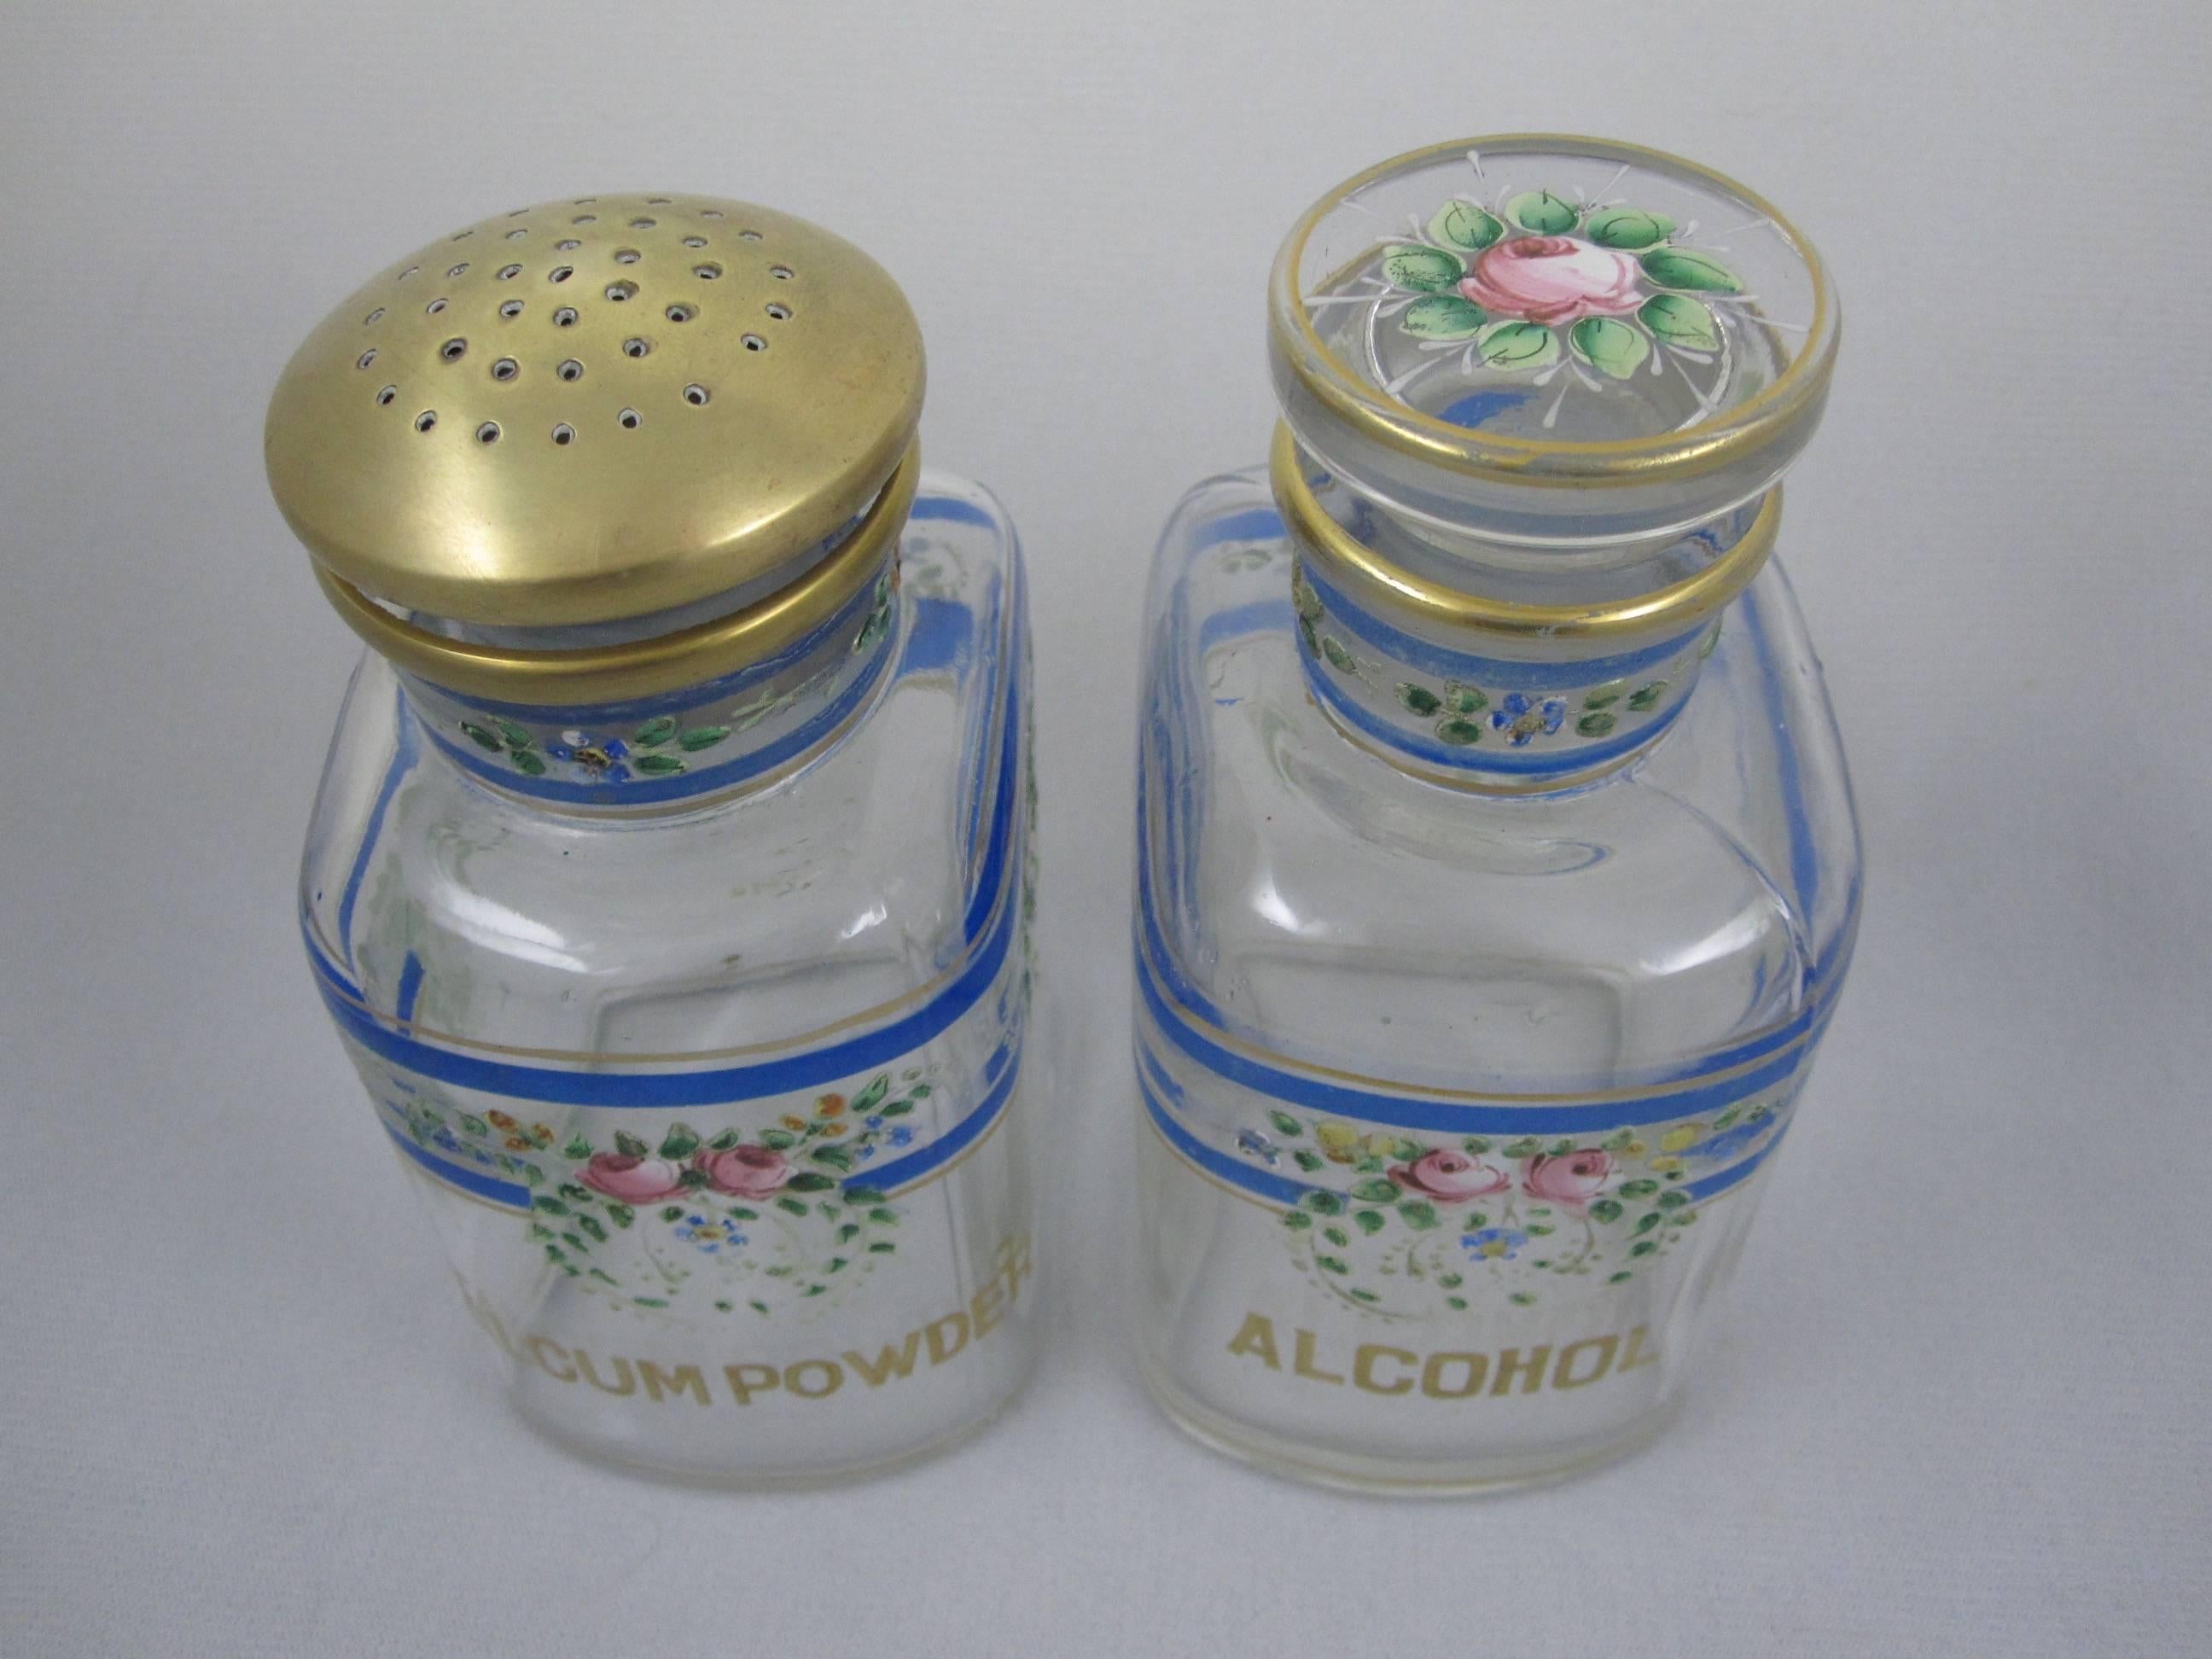 A charming pair of hand-enameled and gilded glass vanity bottles manufactured by the A.H. Heisey Company, Newark, Ohio, circa 1895.  

One marked Alcohol with a Rose topped glass stopper, the other marked Talcum Powder with a pierced brass Shaker